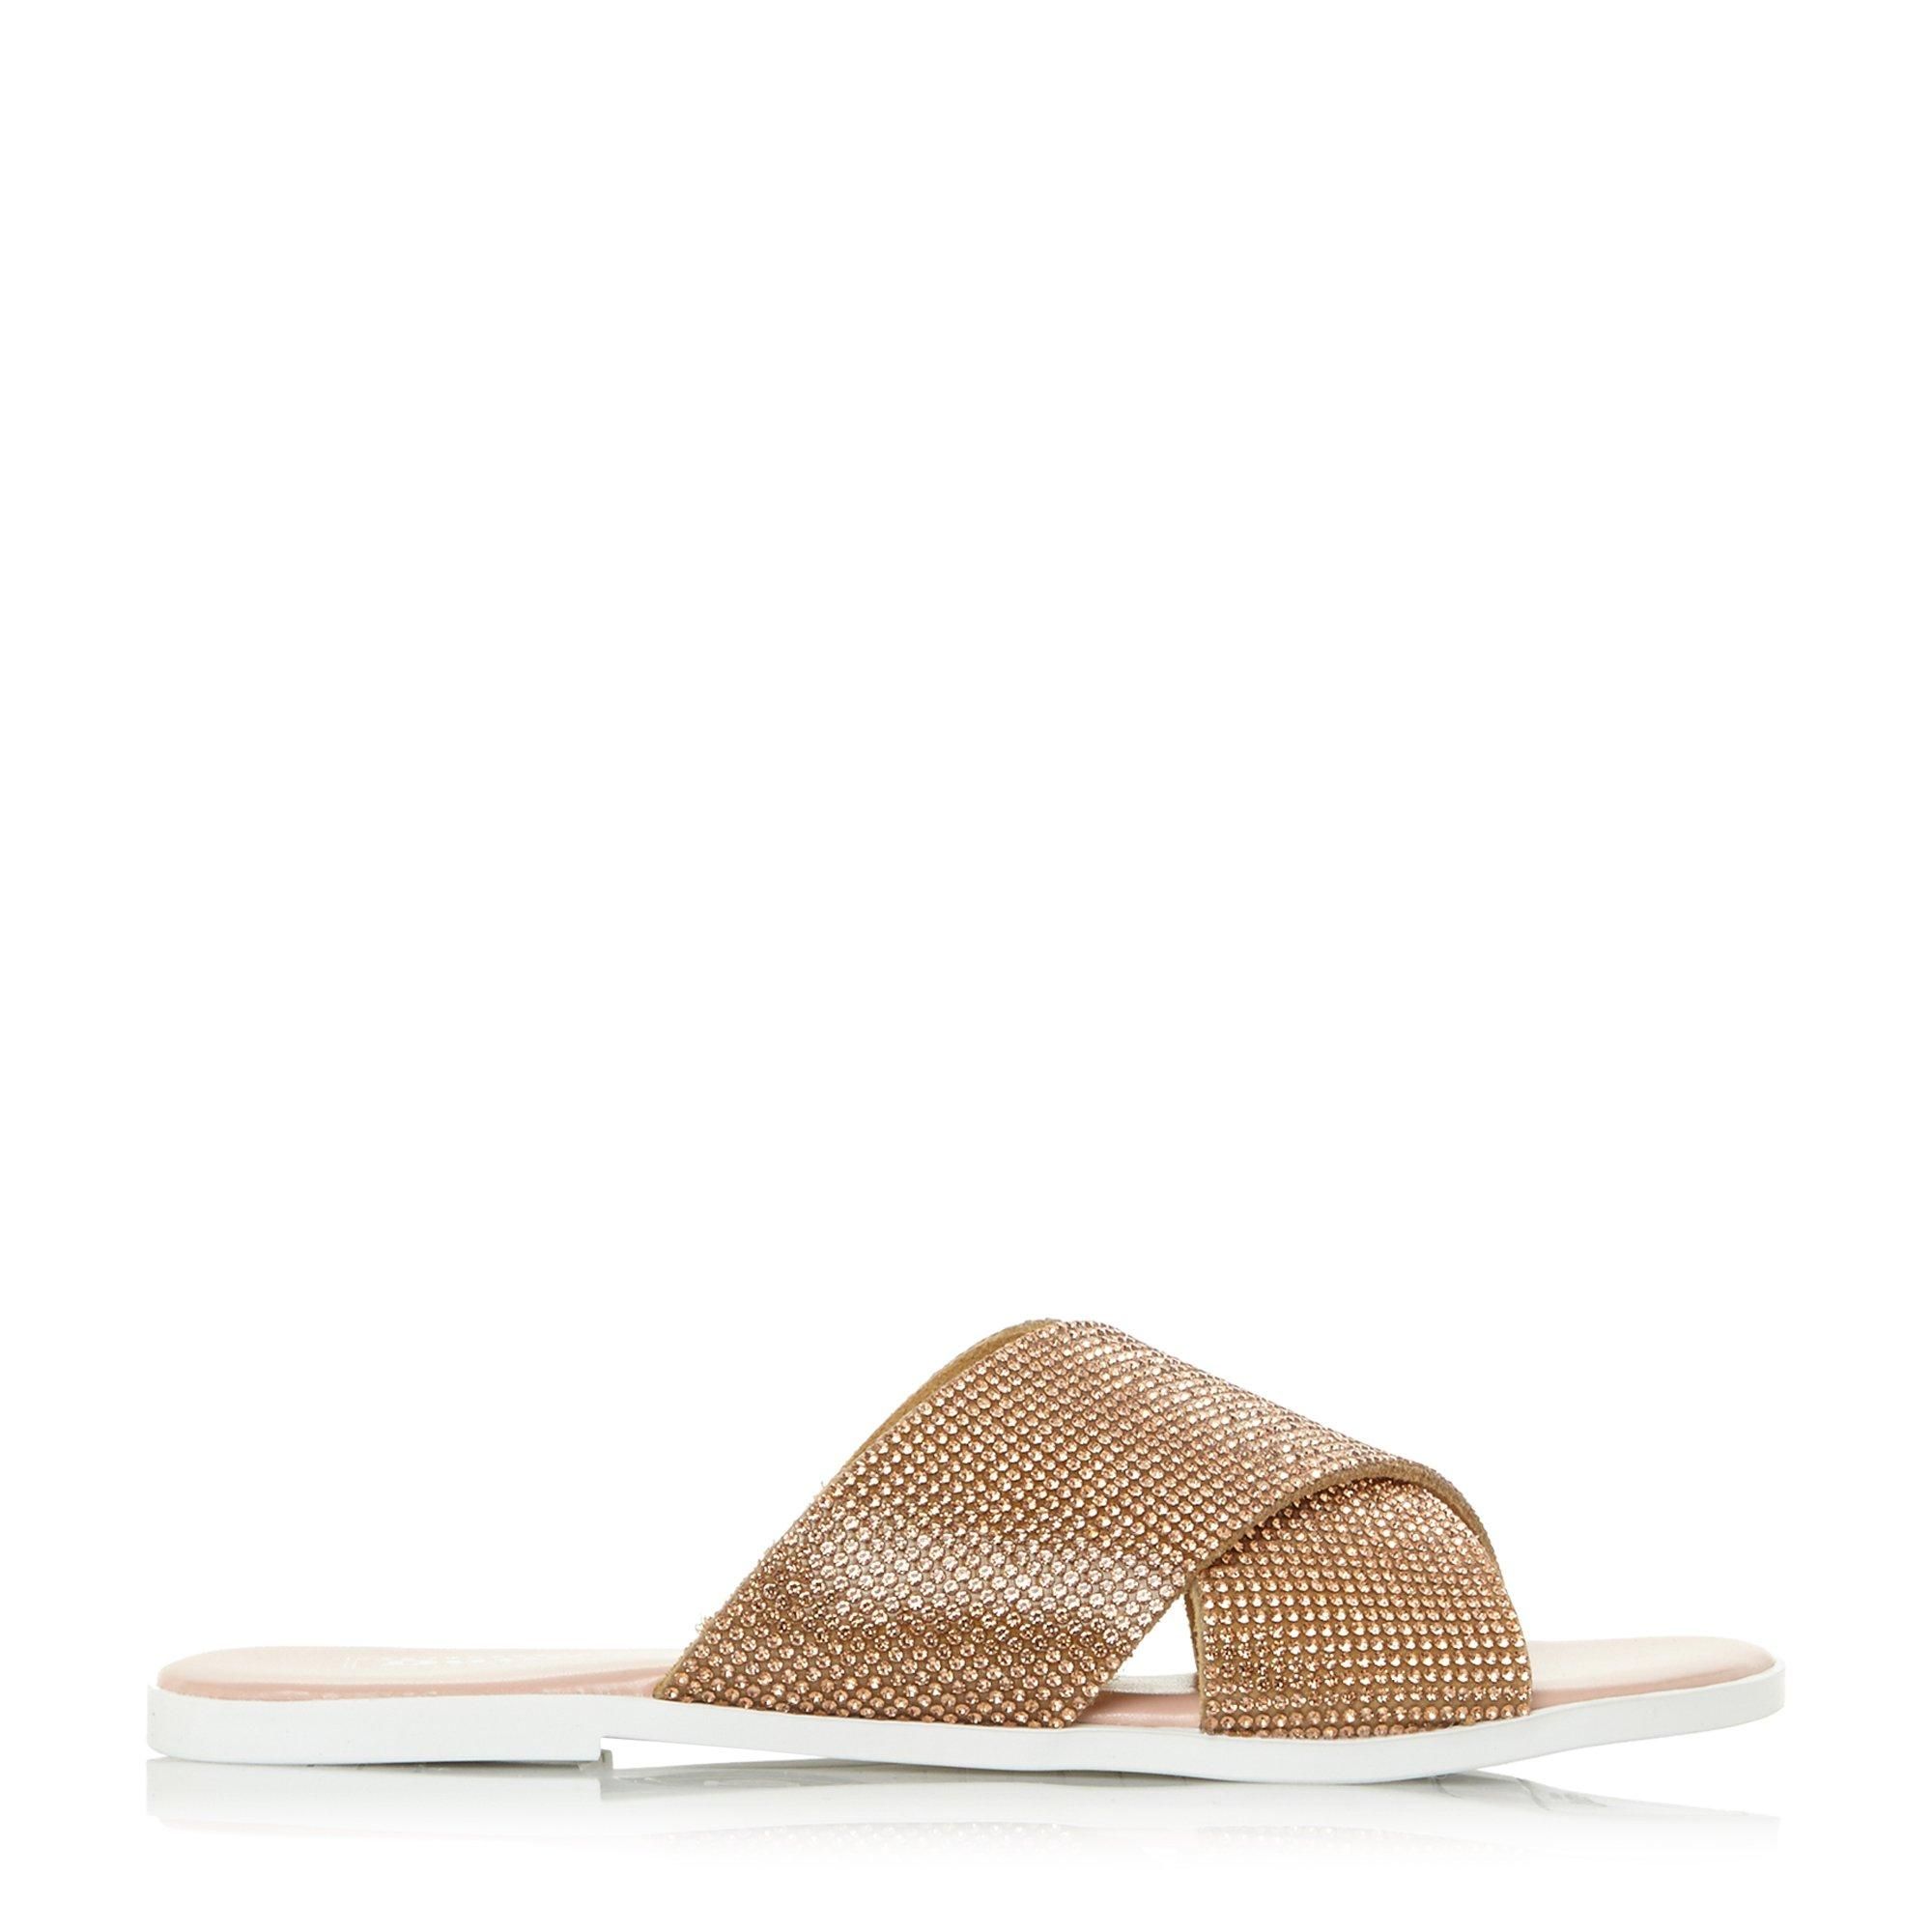 Exude poolside chic with the Dune London Nevadaa diamante sandal. This chic sandal features chunky diamante cross straps. Finished with a low sole and mini block heel.